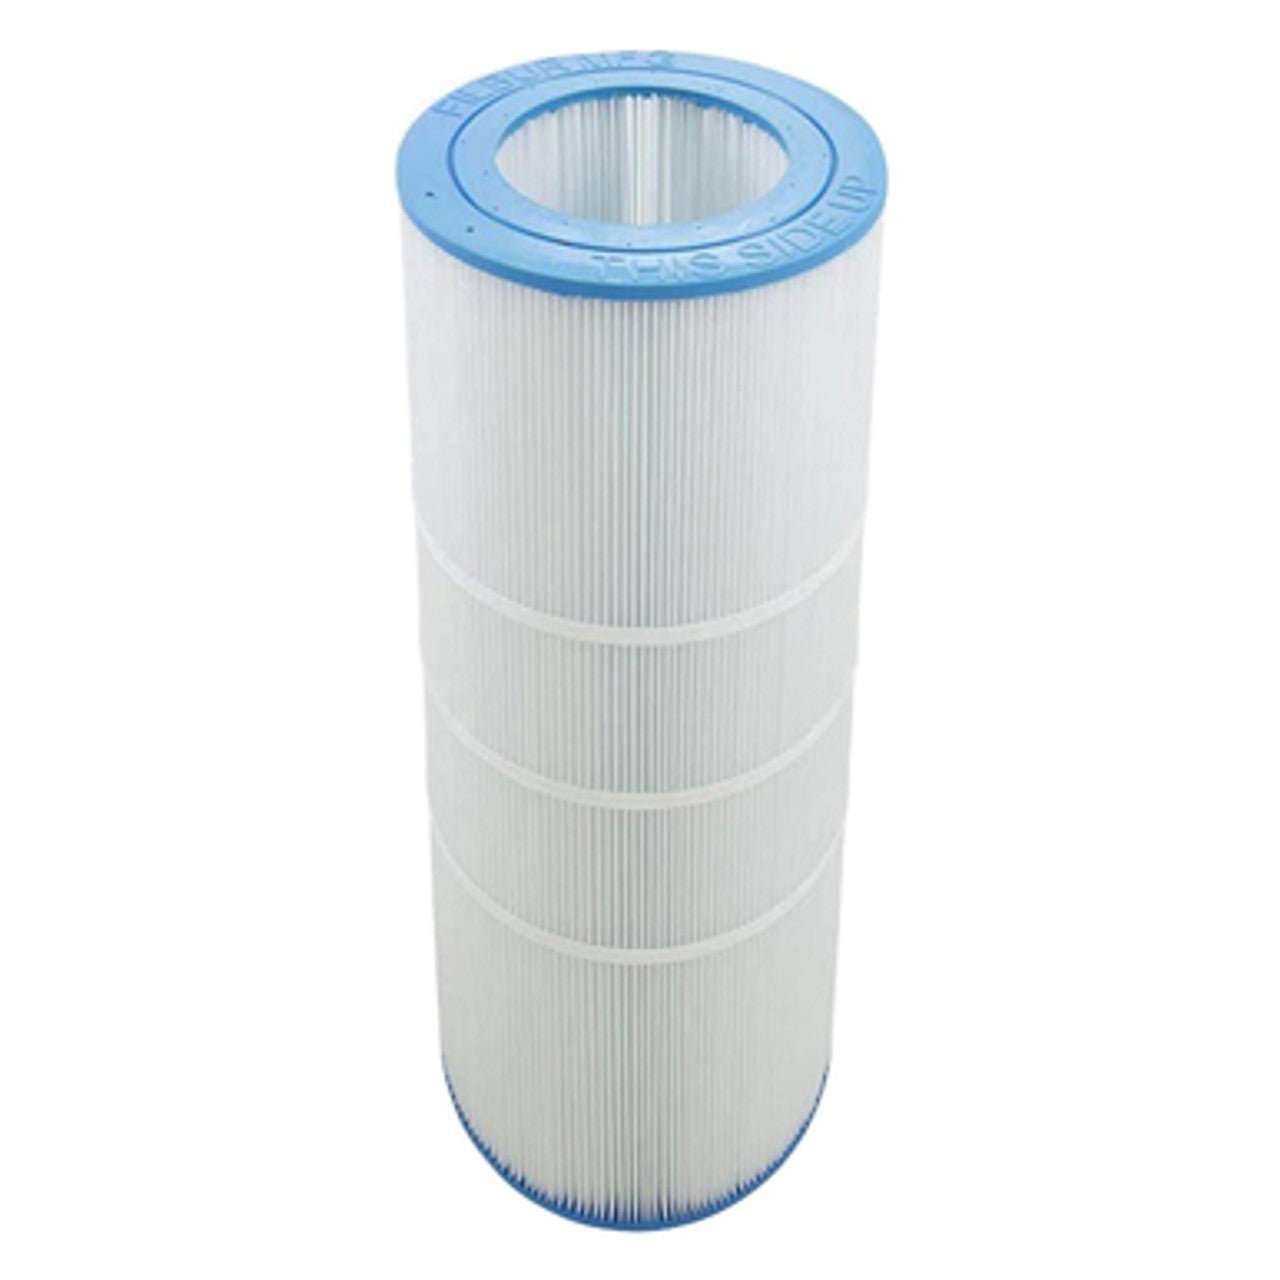 Pentair Clean & Clear RP 100 SqFt Replacement Cartridge R173215 - Pool Filter Parts - img-1